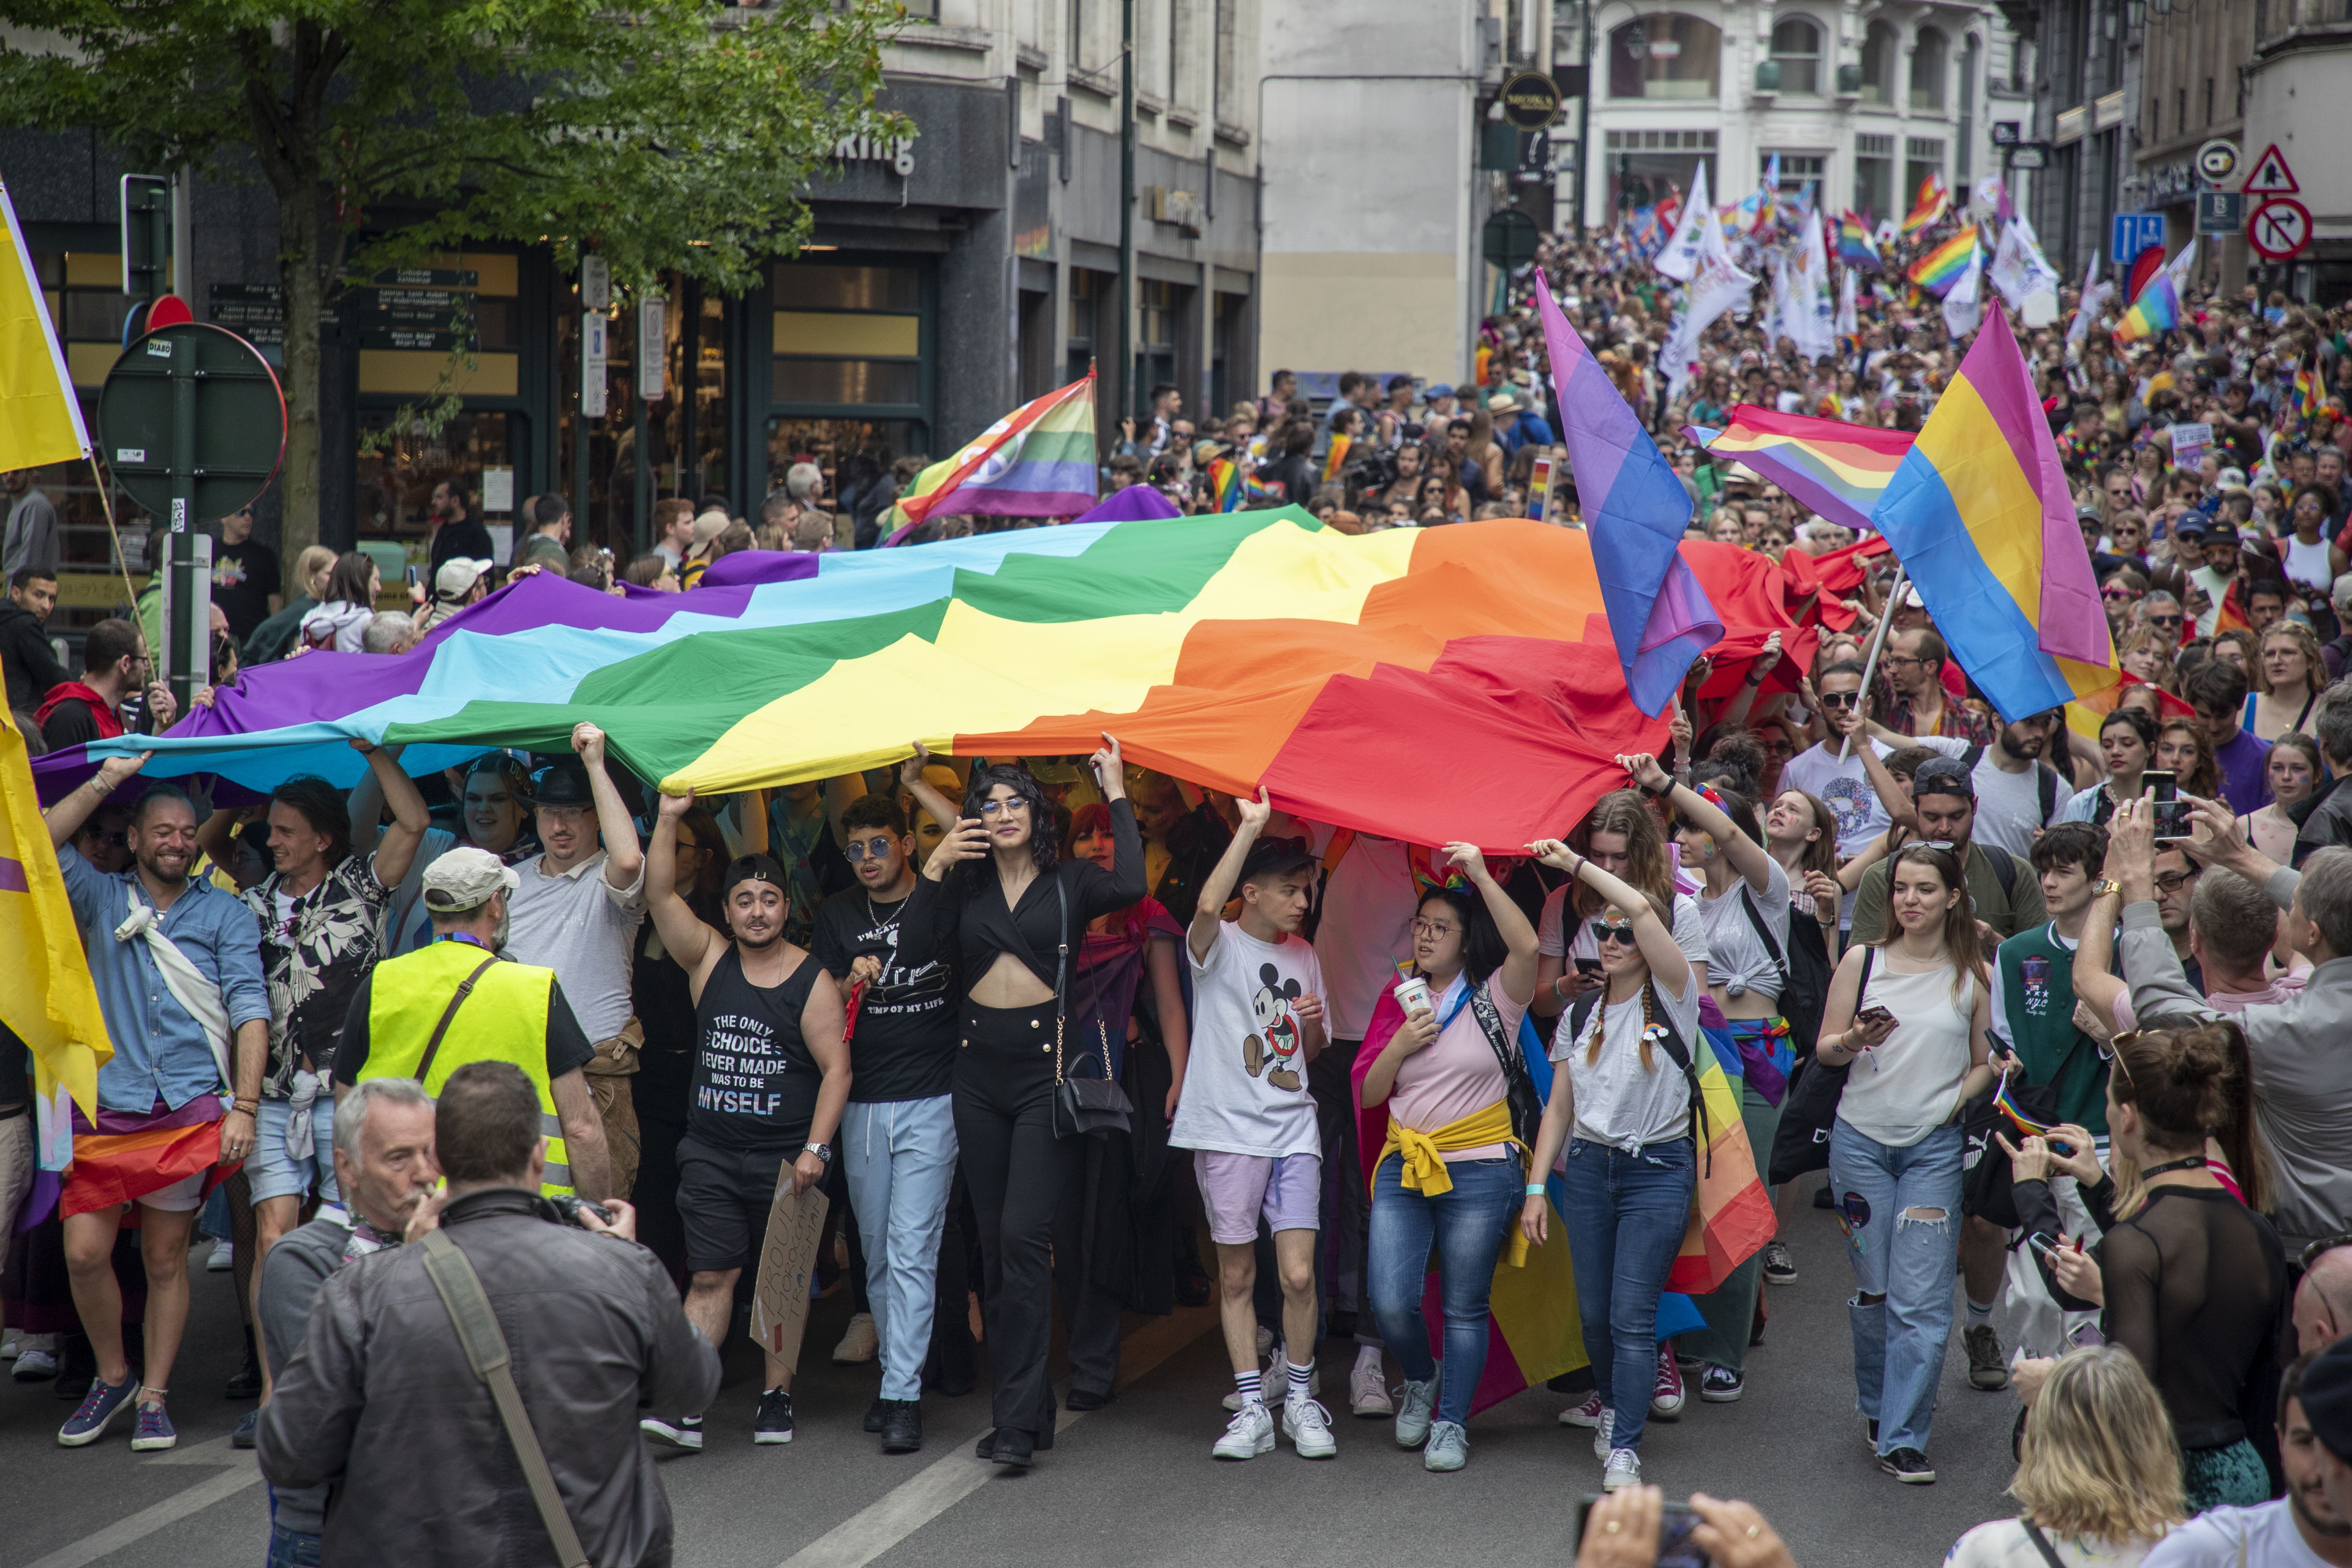 A quarter of a million people expected for Brussels Pride on Saturday